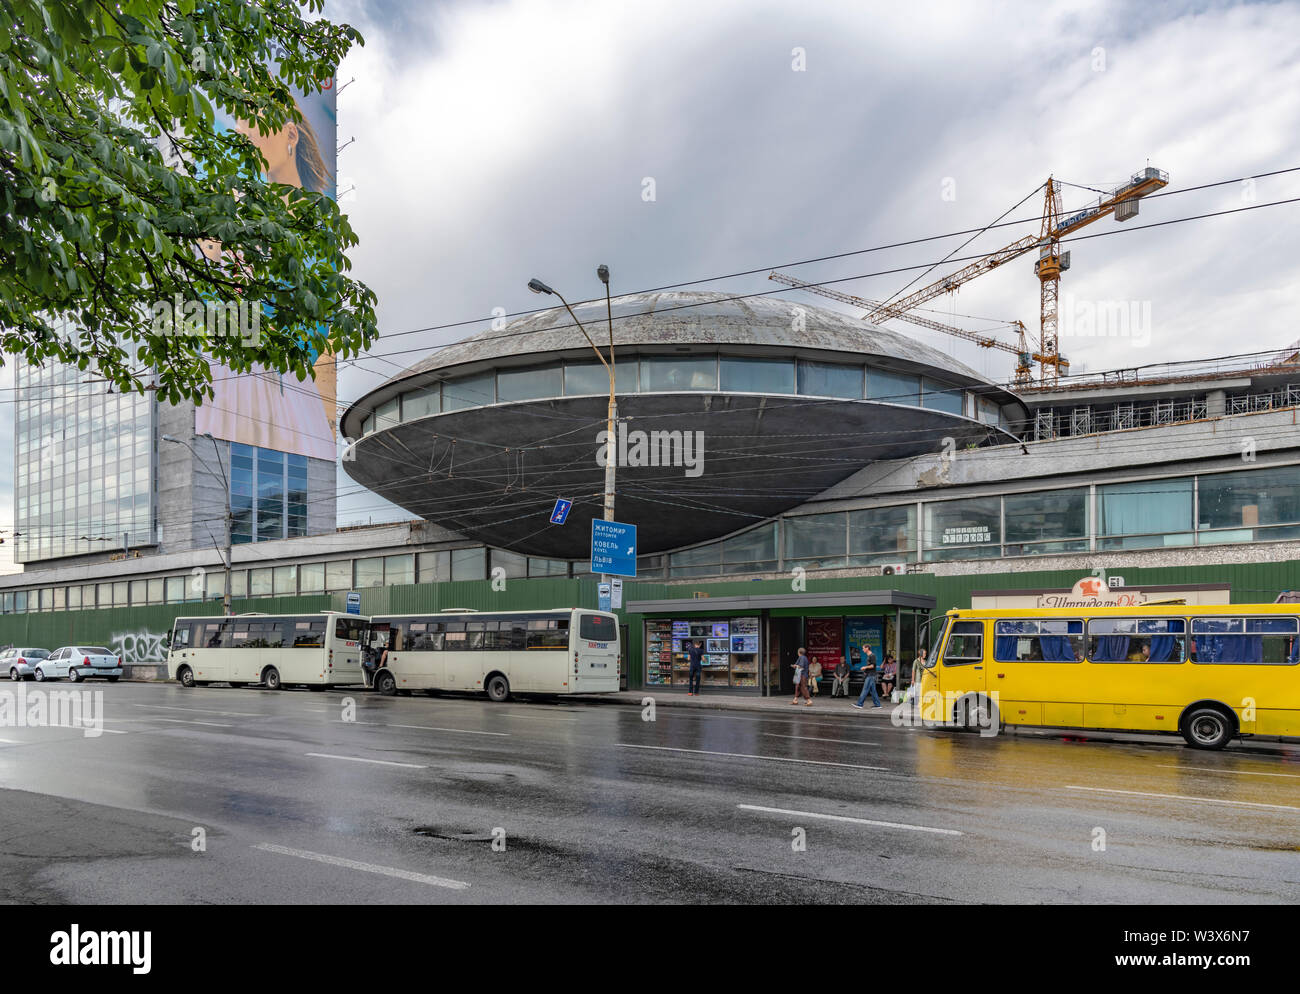 The iconic Flying Saucer Building. Built in 1971 by architect Florian Yuriev as part of the Ukrainian Institute of Science and Information. Stock Photo